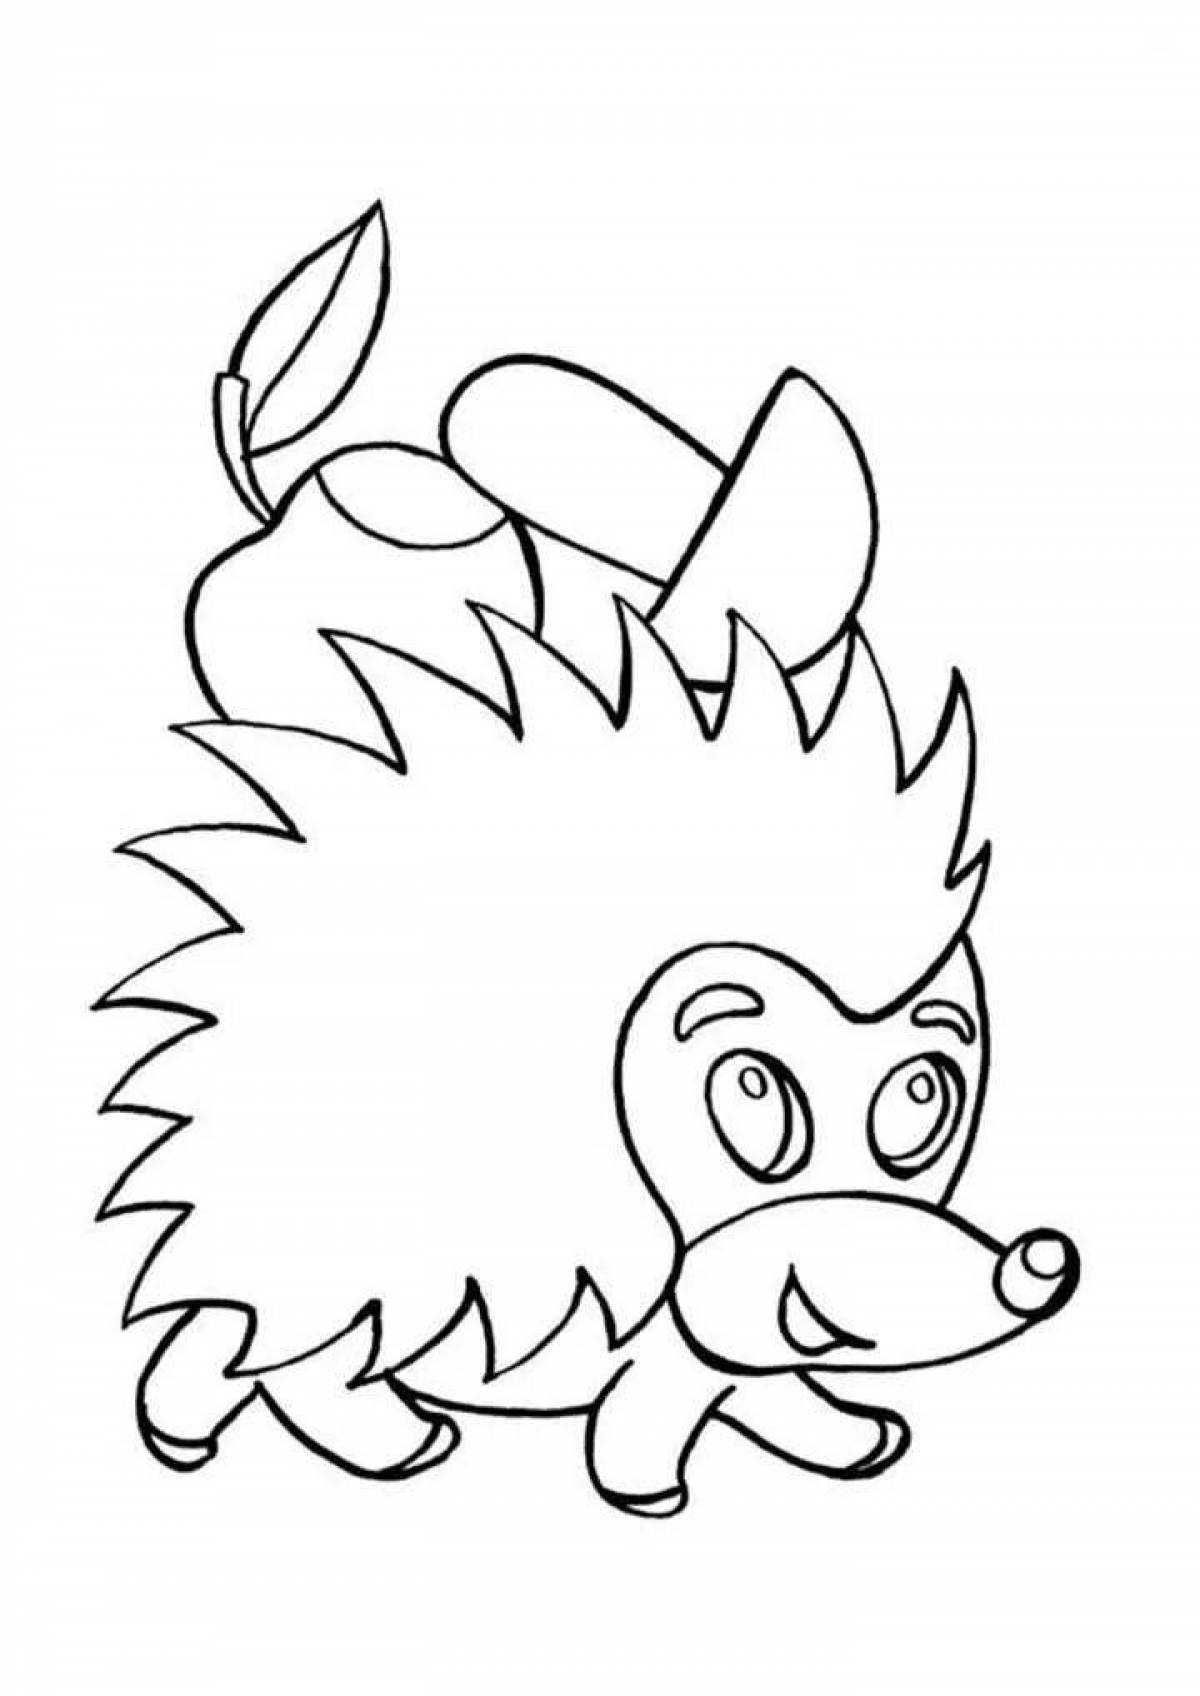 Hedgehog coloring pages with color explosion for kids